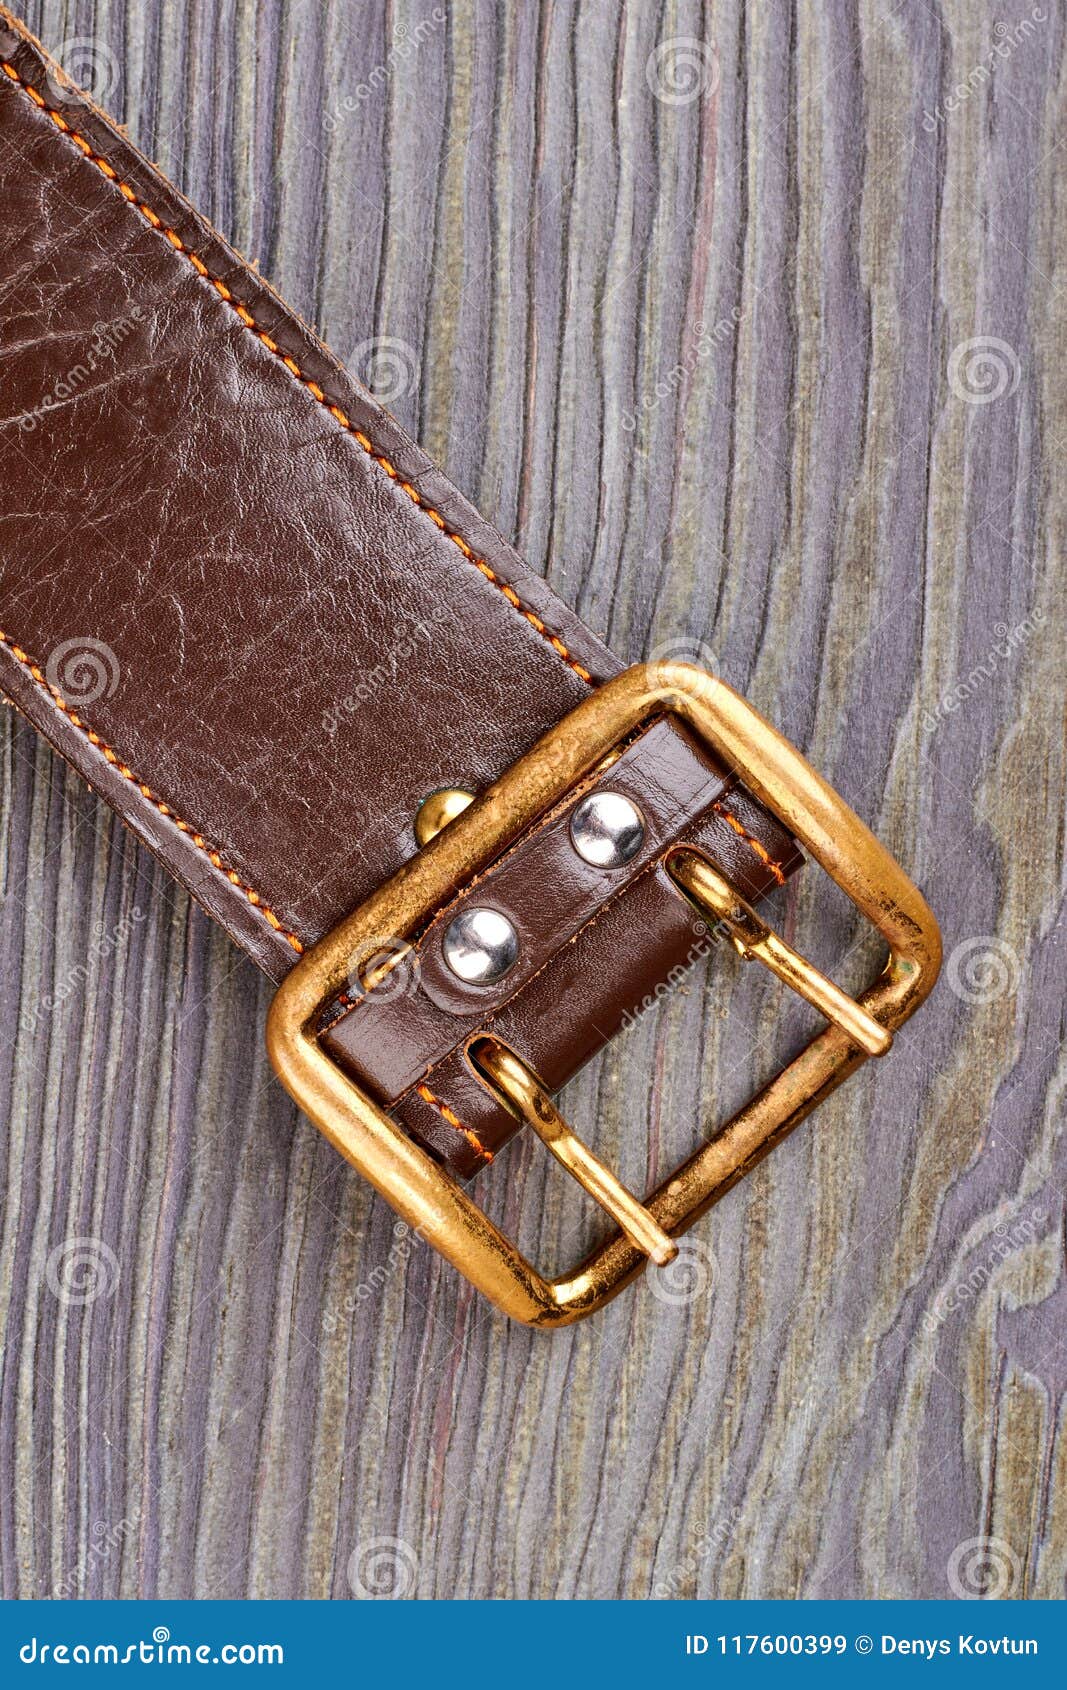 Brown Leather Belt Close Up. Stock Image - Image of accessory, elegant ...